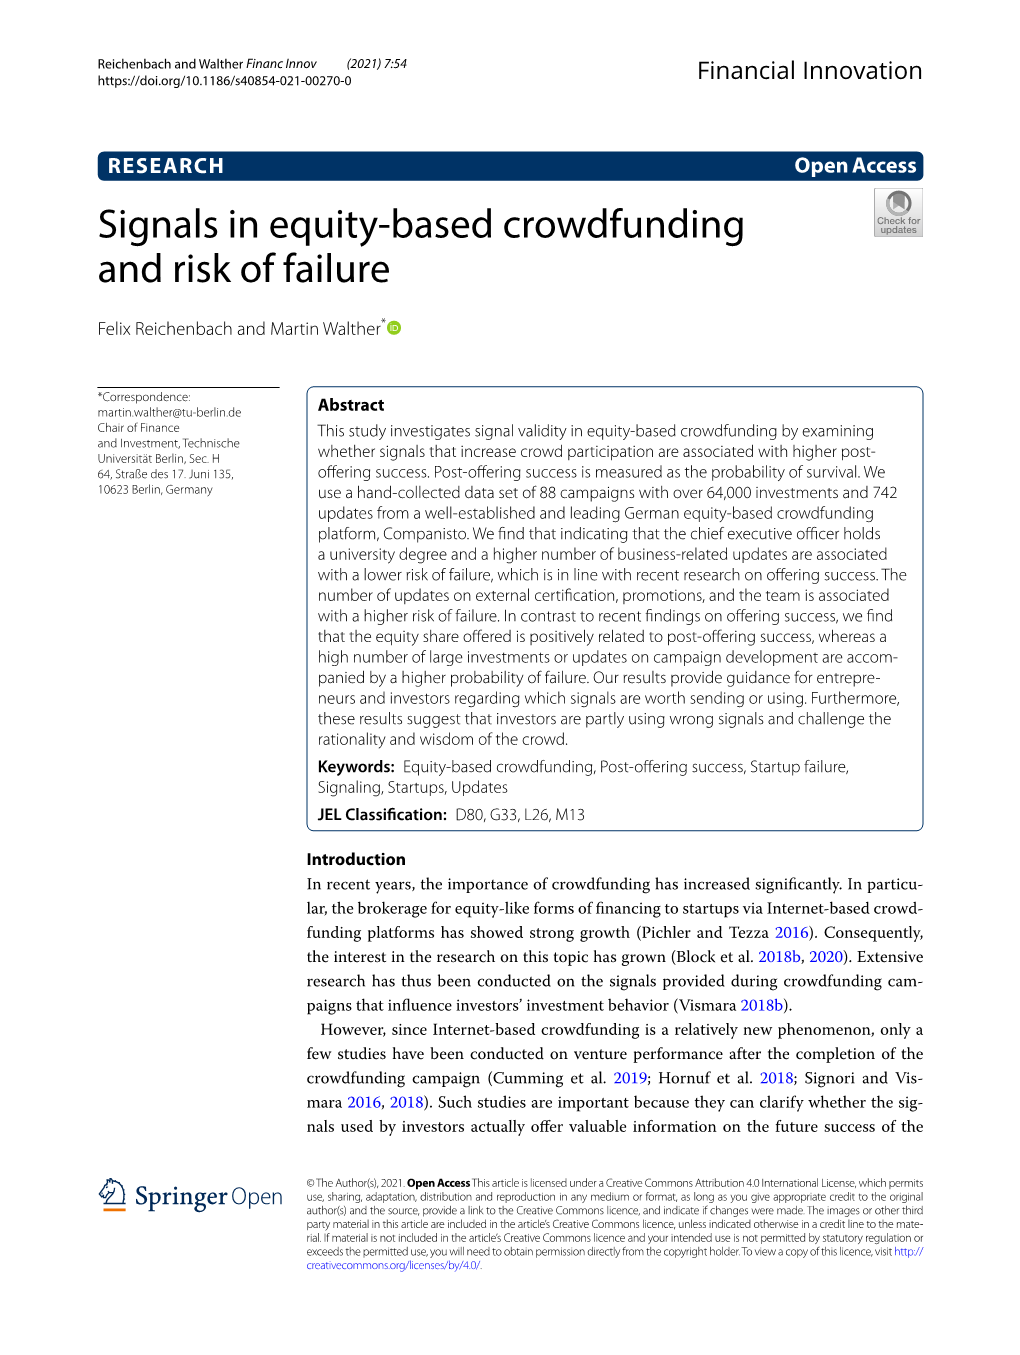 Signals in Equity-Based Crowdfunding and Risk of Failure